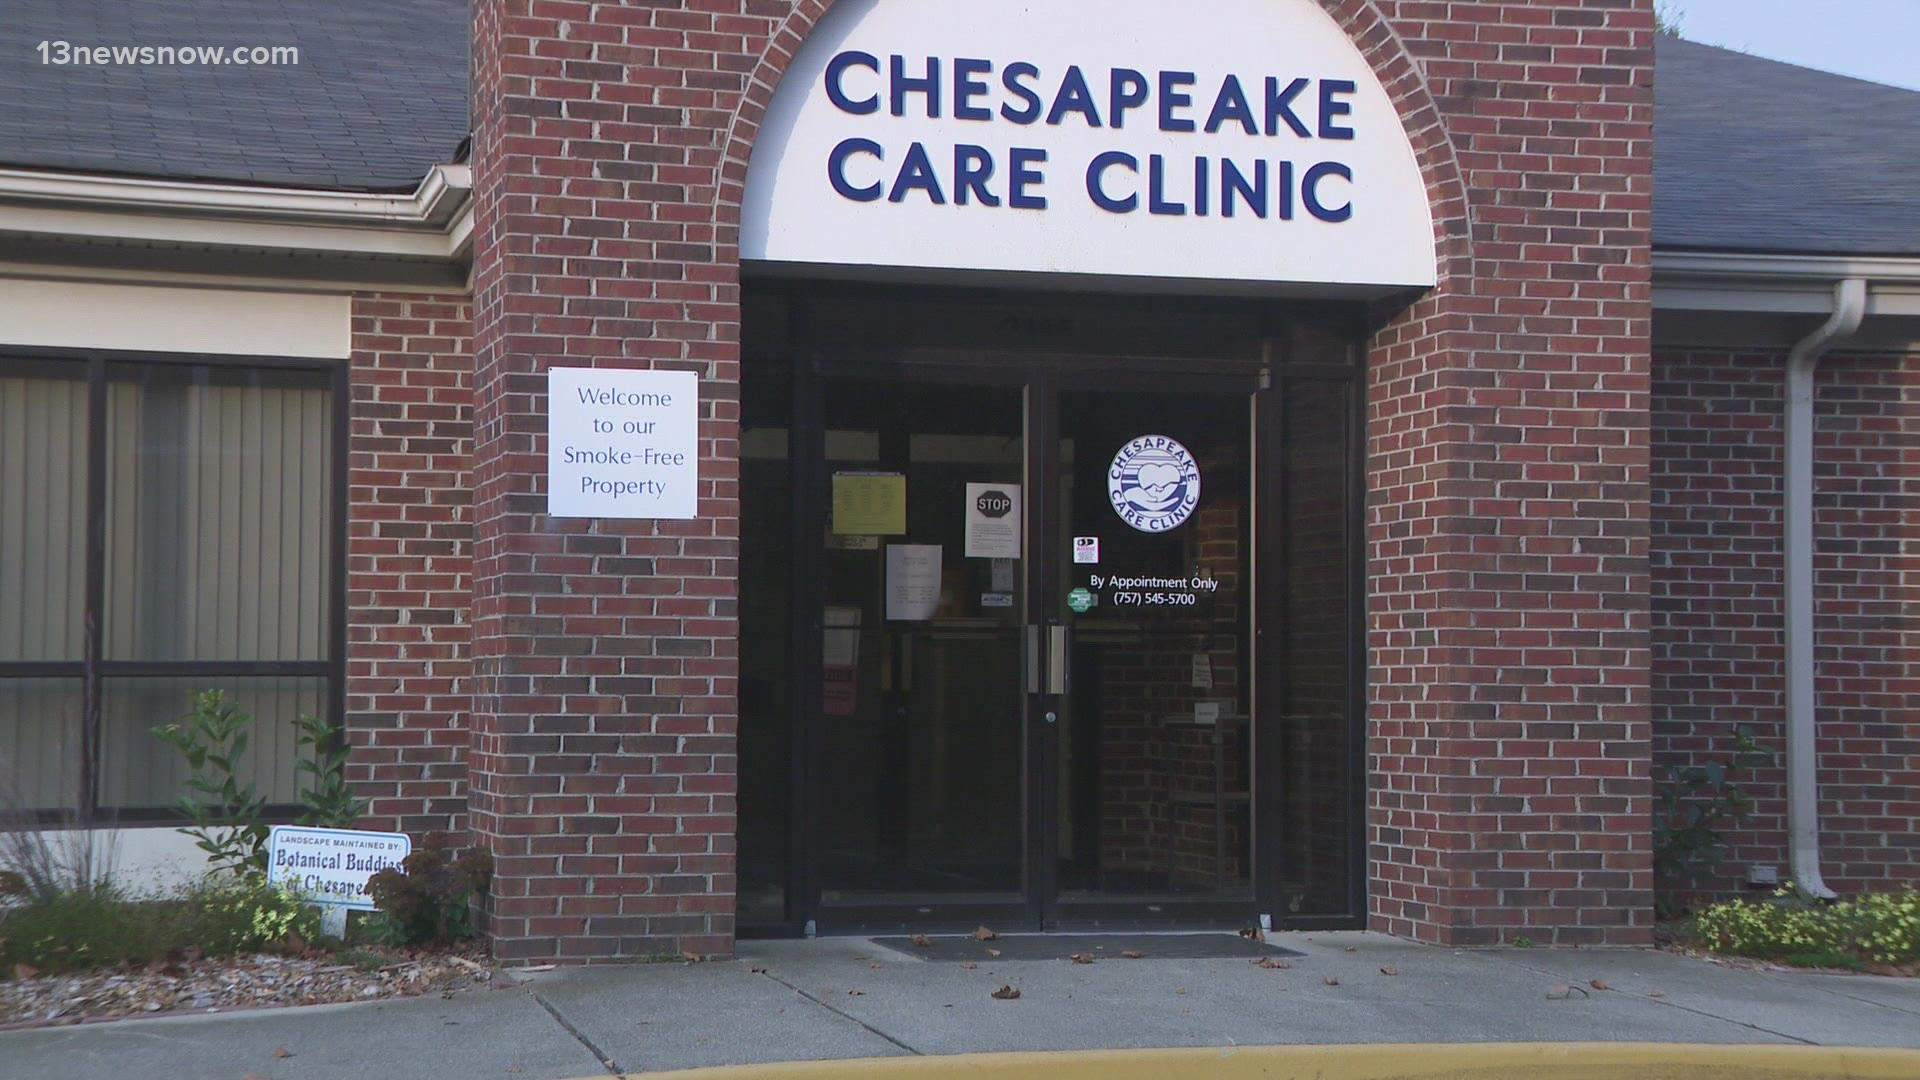 The nonprofit says it didn't have enough space to serve its growing number of patients.